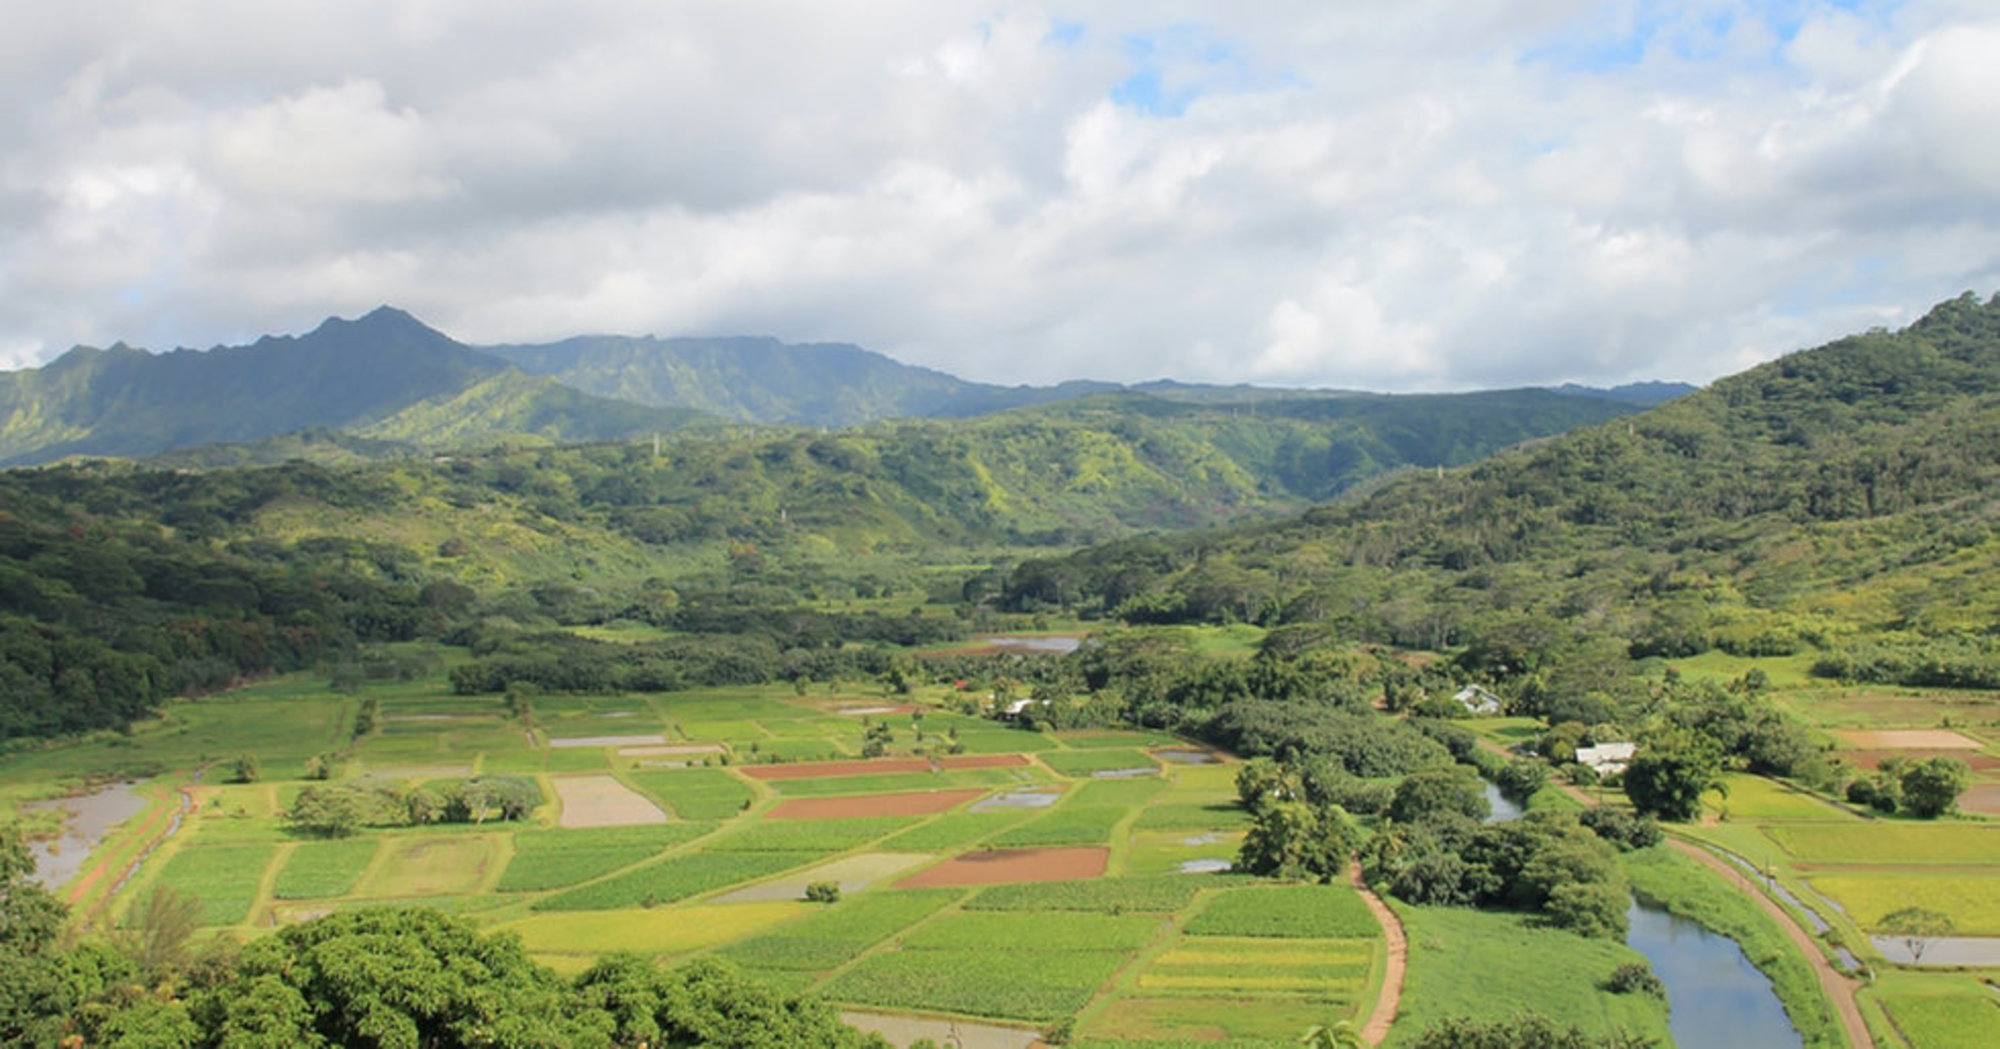 Hawaii Becomes First State in the U.S. to Ban the Toxic Pesticide Chlorpyrifos - EcoWatch